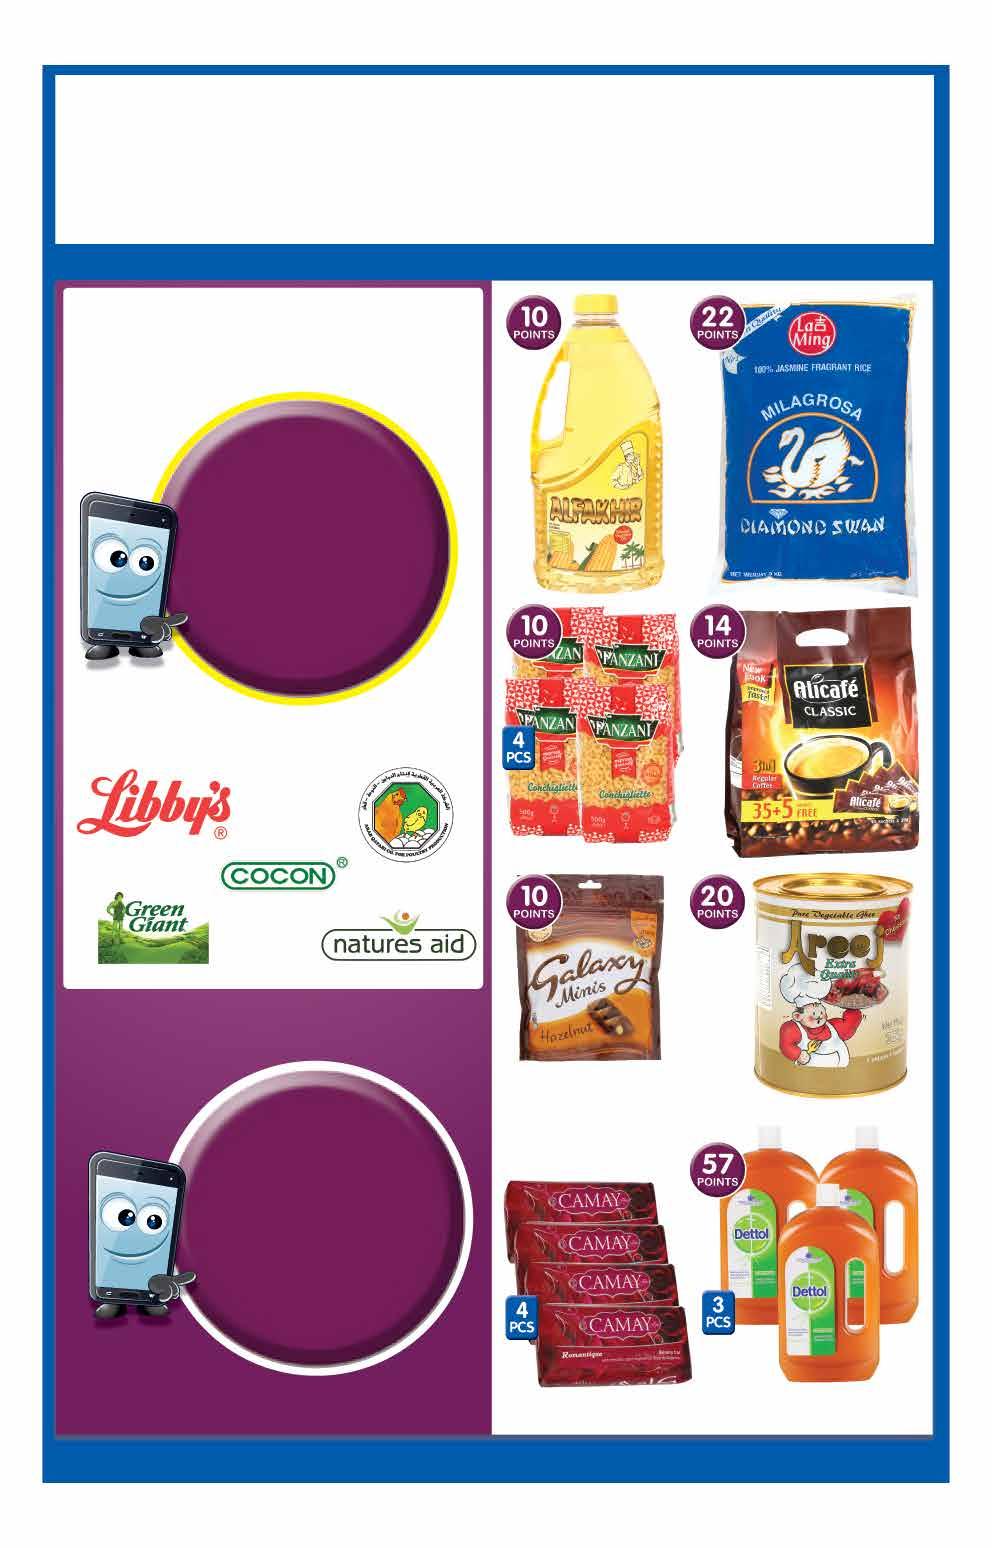 From 11th until 17th October, 2017 or until stock last (Purchase limit may apply ) These offers are only available in Carrefour hypermarkets من 11 إلى 17 أكتوبر 2017 أو حتى نفاذ الكمية )قد تكون هنالك